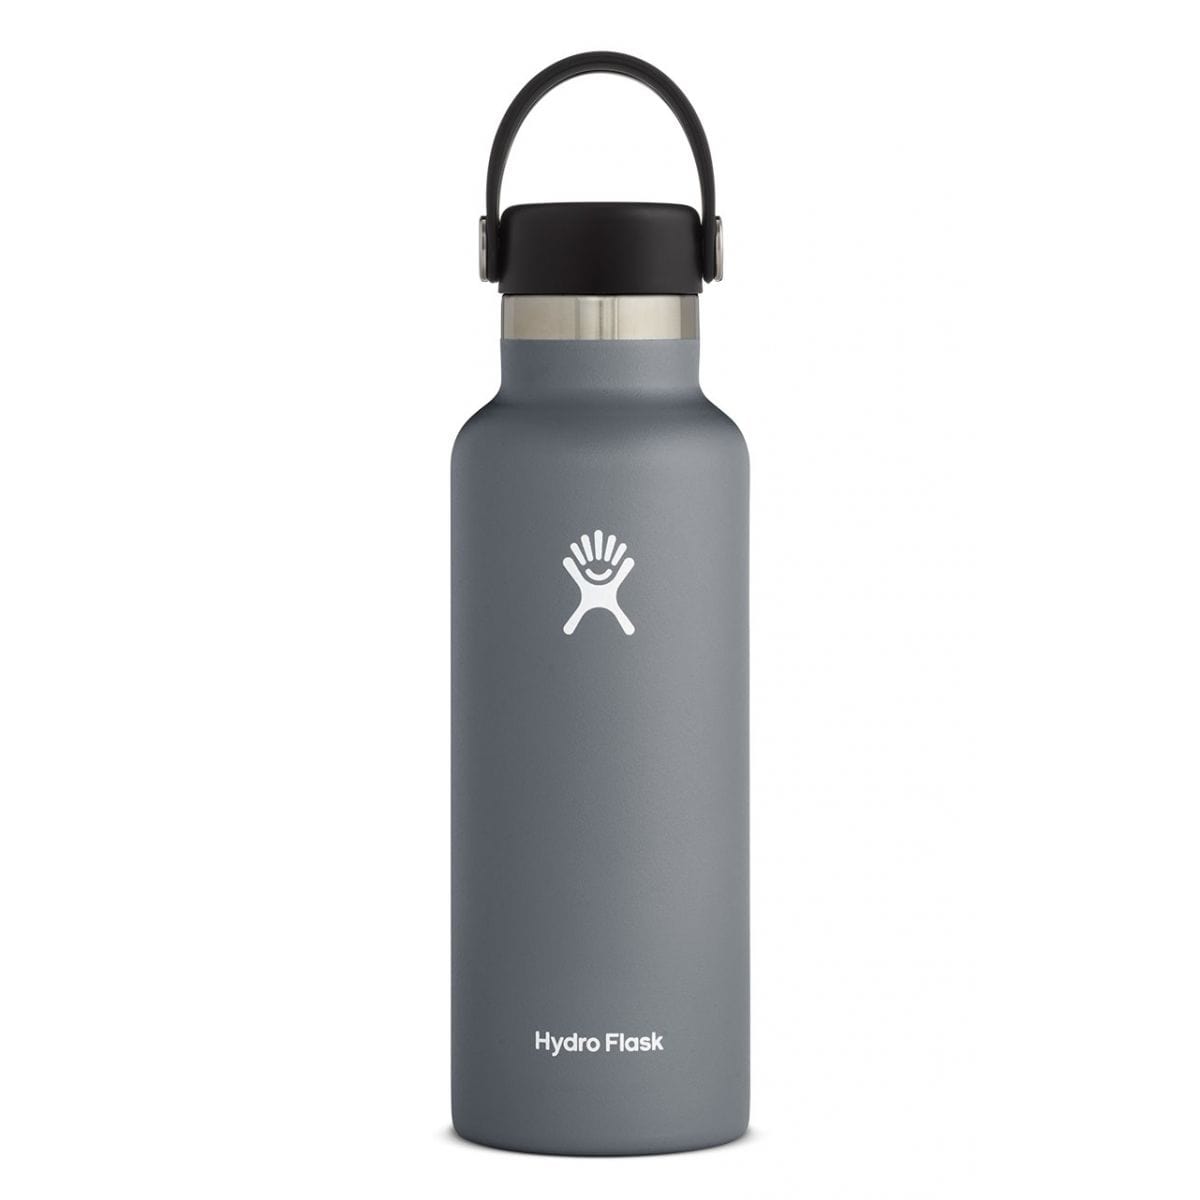 Hydro Flask Insulated Bottle Hydro Flask 18 oz Standard Mouth Bottle Stone